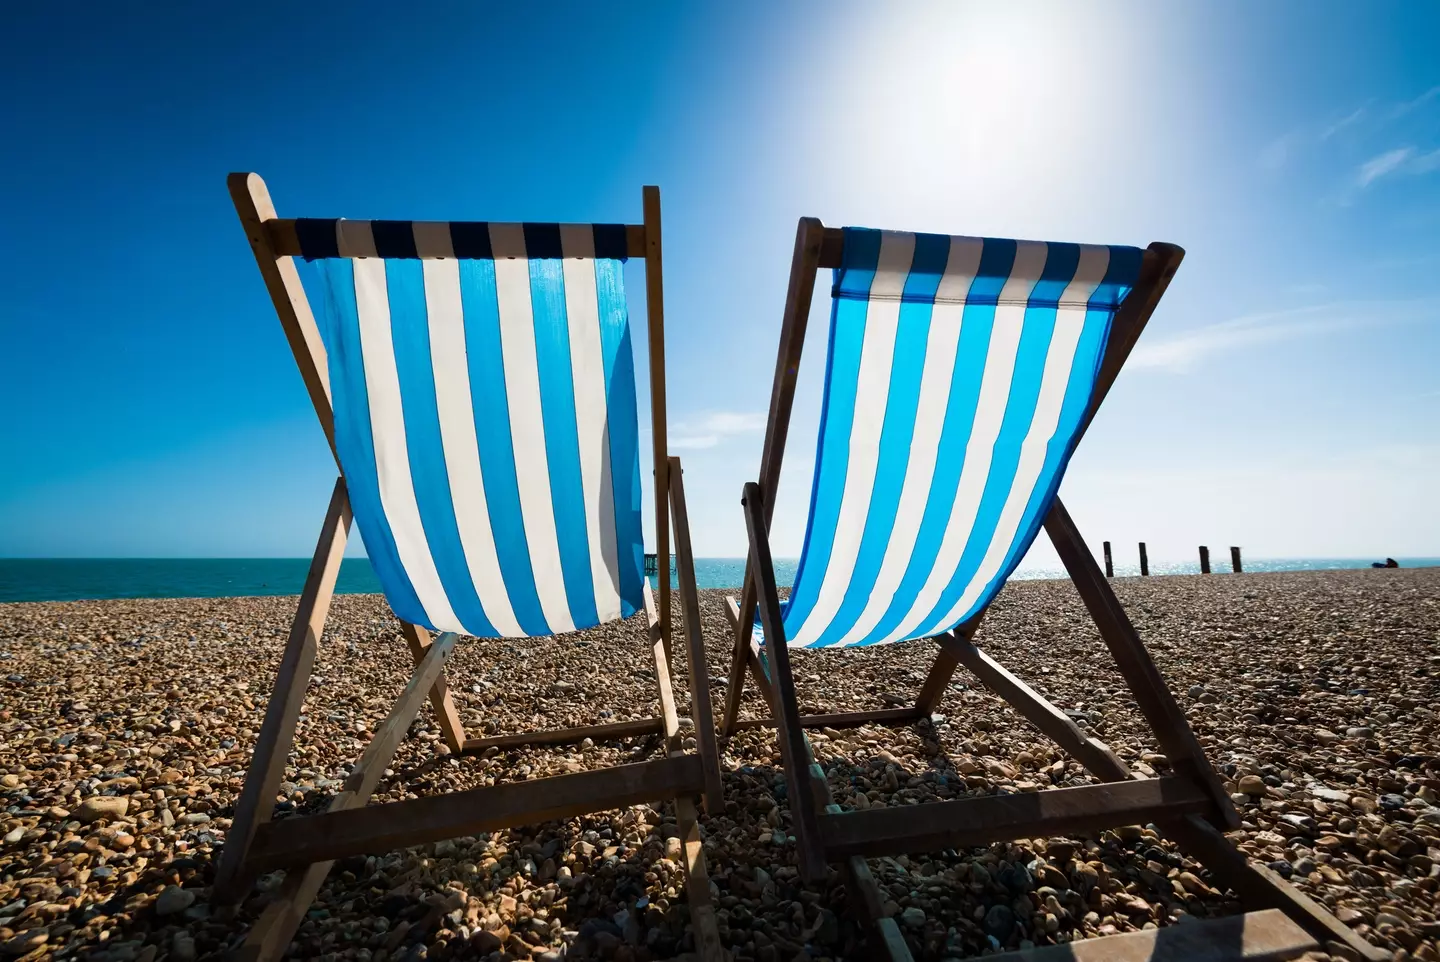 Before planning your trip to the closest beach, you might want to listen up. (Getty Stock Photo)